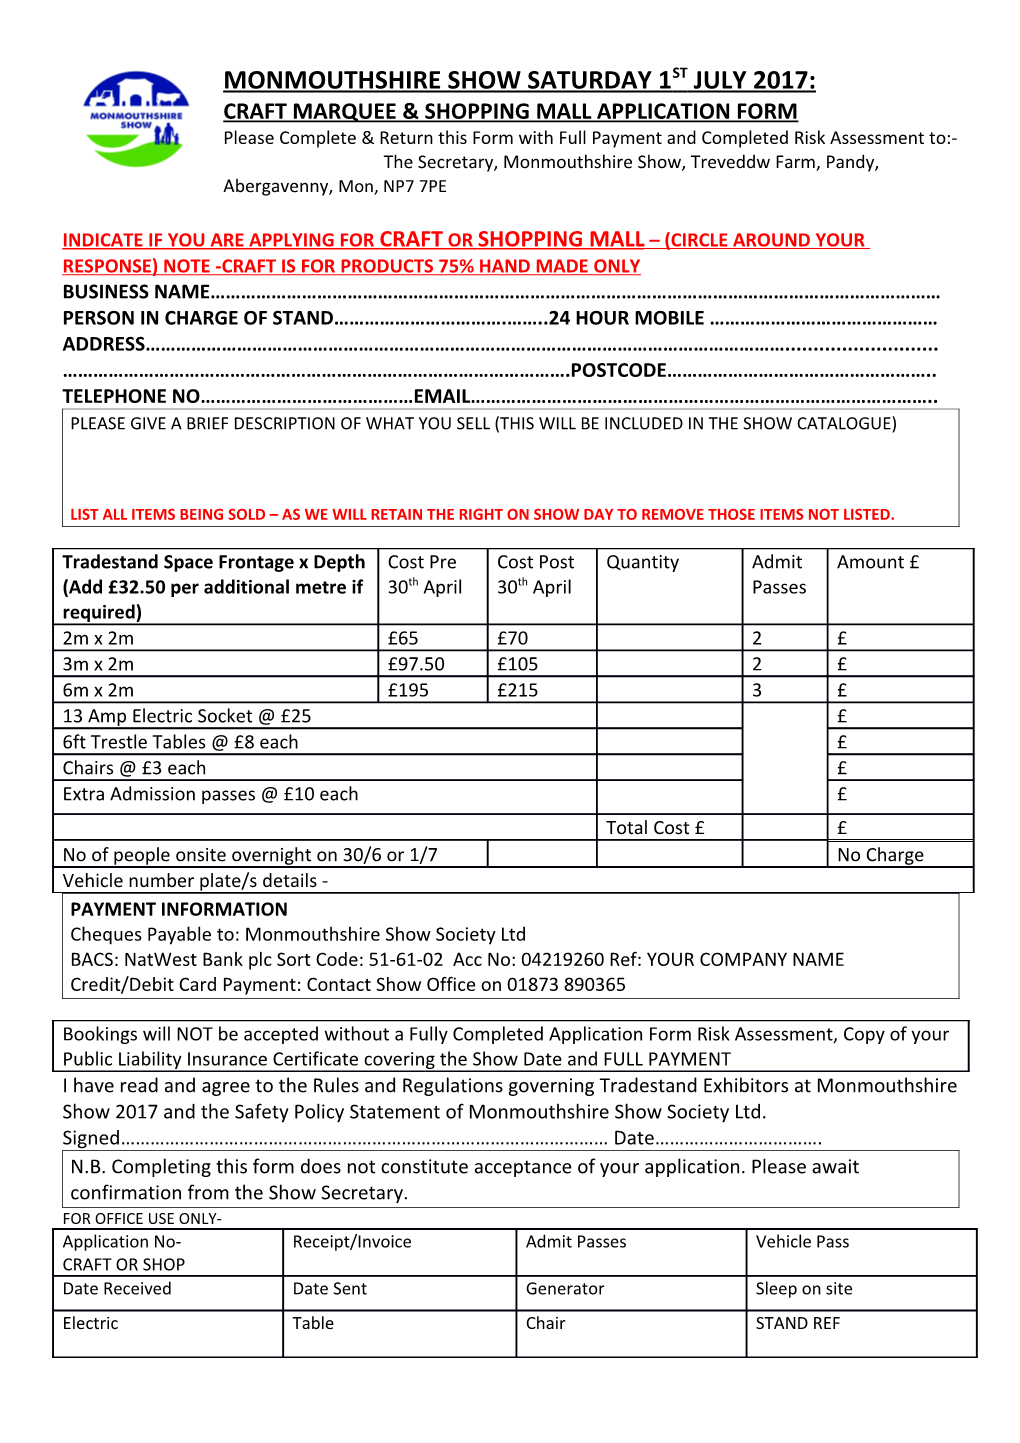 Craft Marquee & Shopping Mall Application Form